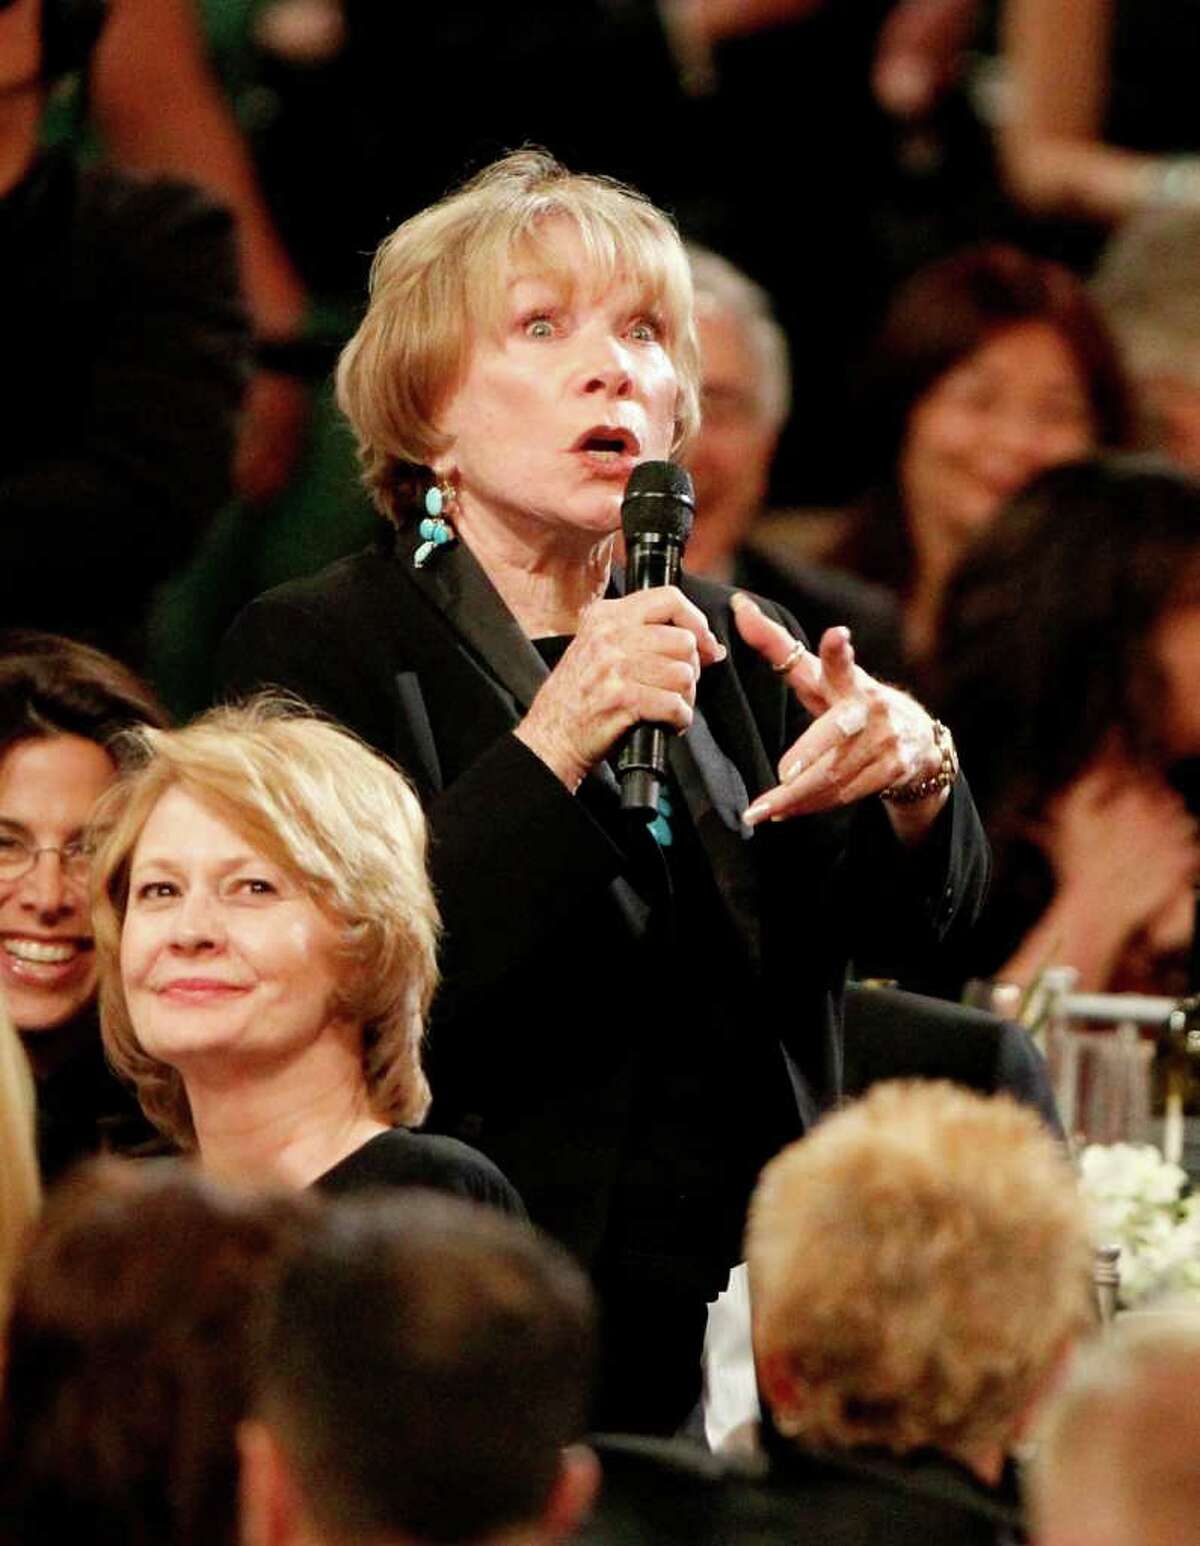 Actress Shirley MacLaine in the audience during the 38th AFI Life Achievement Award honoring Mike Nichols held at Sony Pictures Studios on June 10, 2010, in Culver City, Calif. (Christopher Polk / Getty Images for AFI)